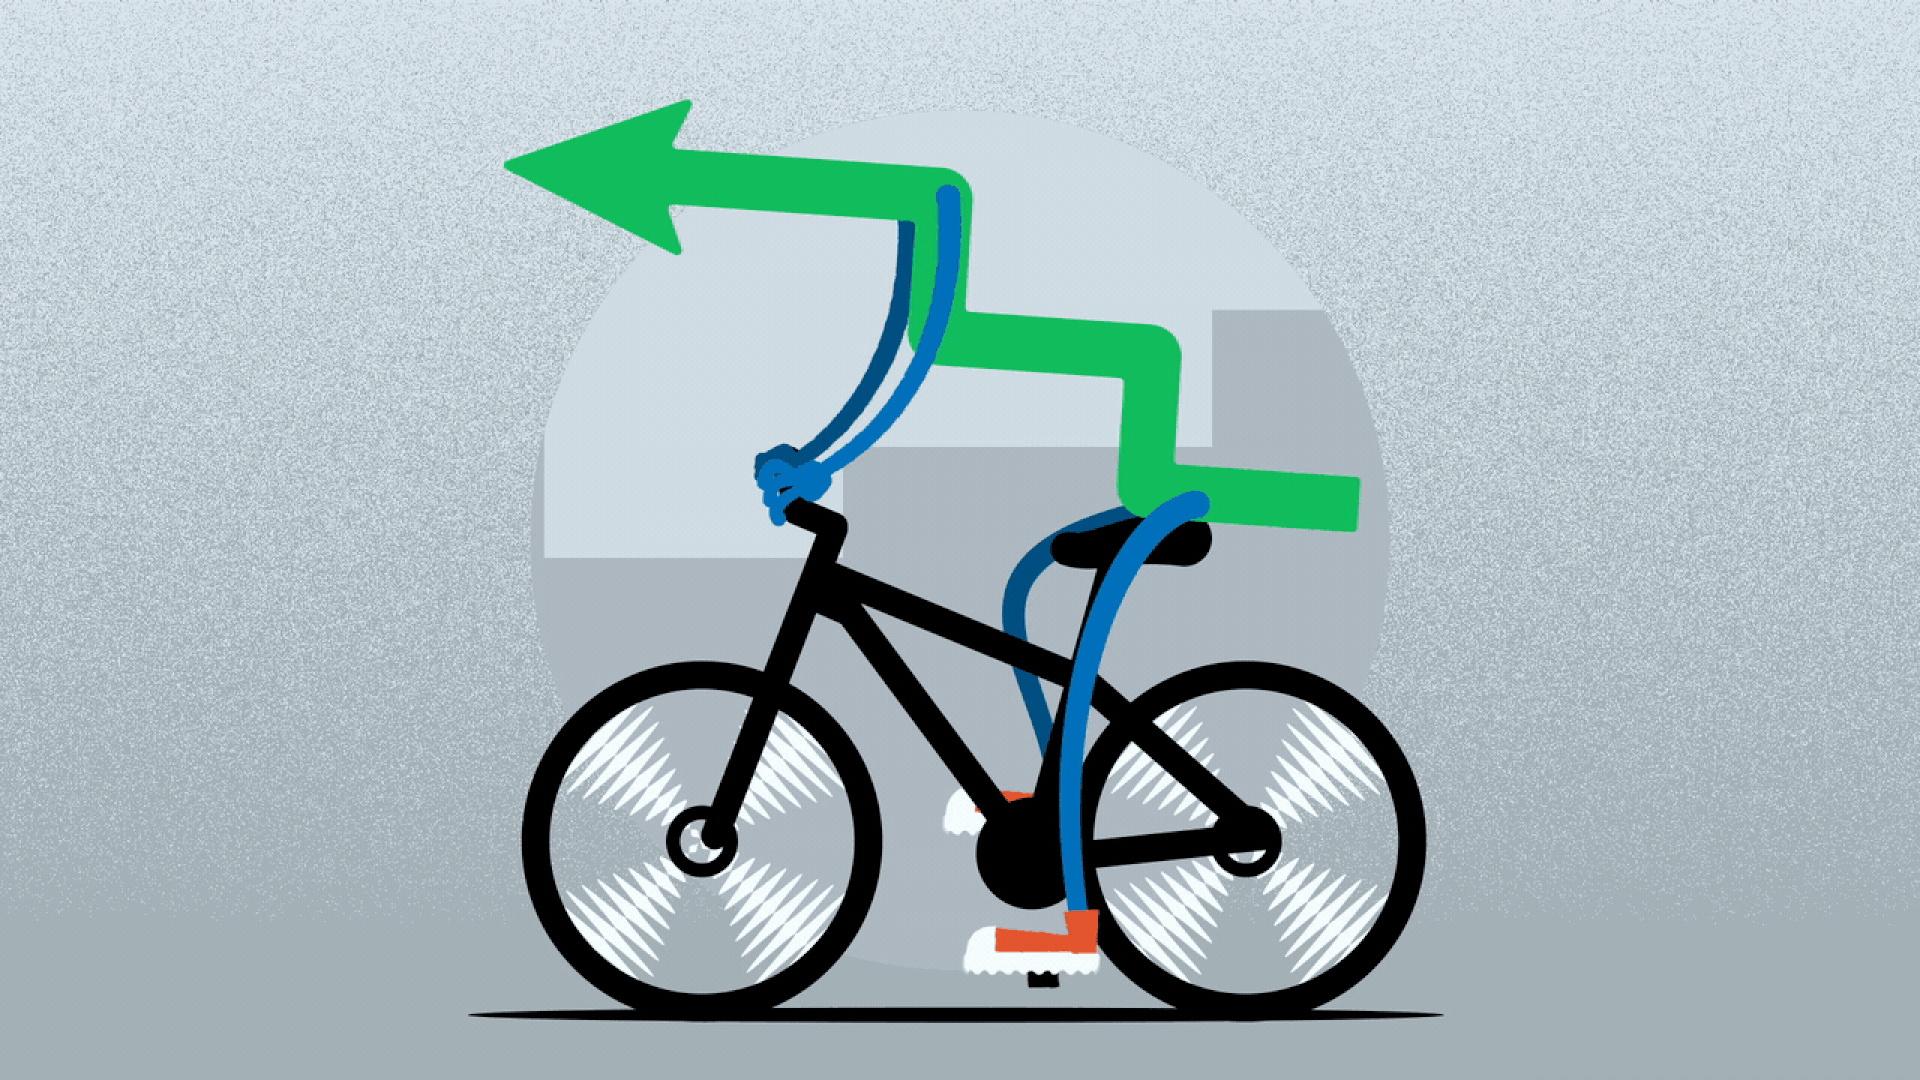 Illustration of the arrow from the Wiggle sign, with arms and legs, riding a bike.